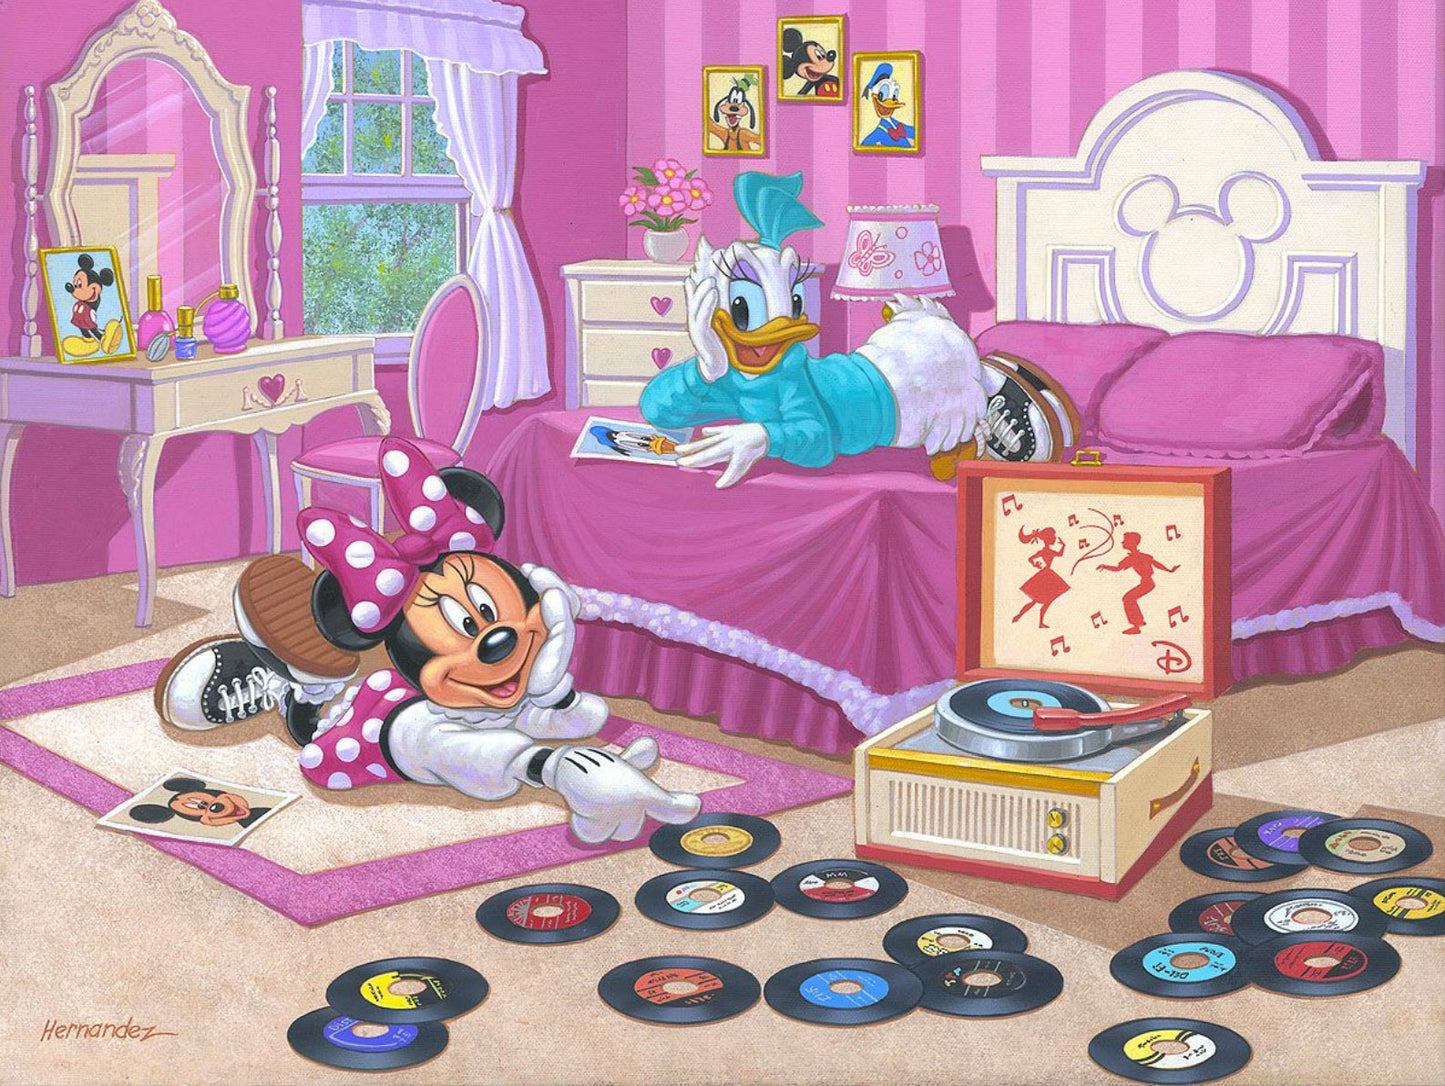 Manuel Hernandez Disney "Minnie and Daisy's Favorite Tune" Limited Edition Canvas Giclee